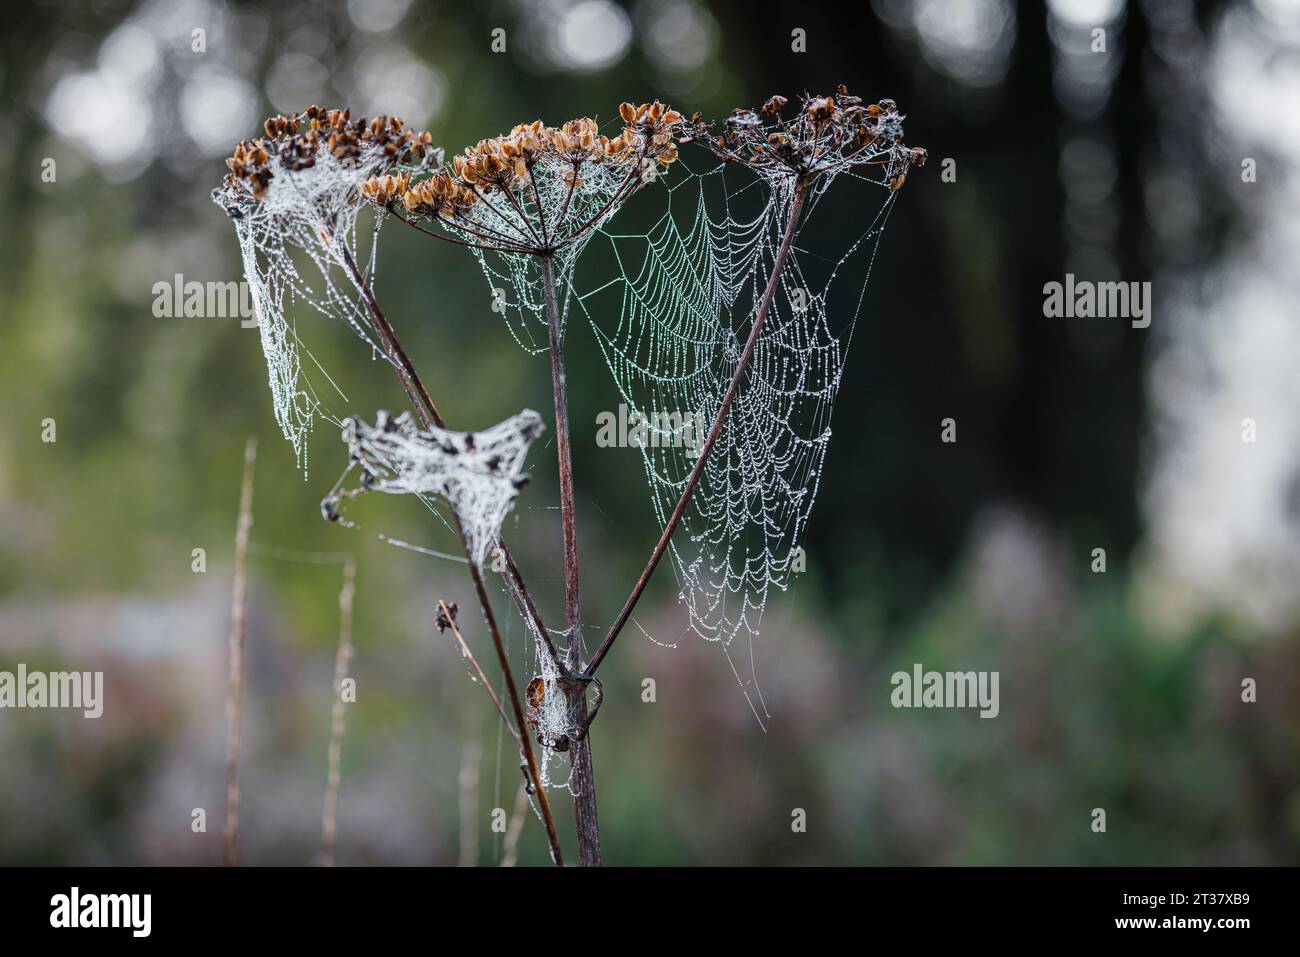 Spiders' webs on the brown seed heads of umbelliferous plants in Horsell Common, Woking, Surrey with early morning dew droplets Stock Photo